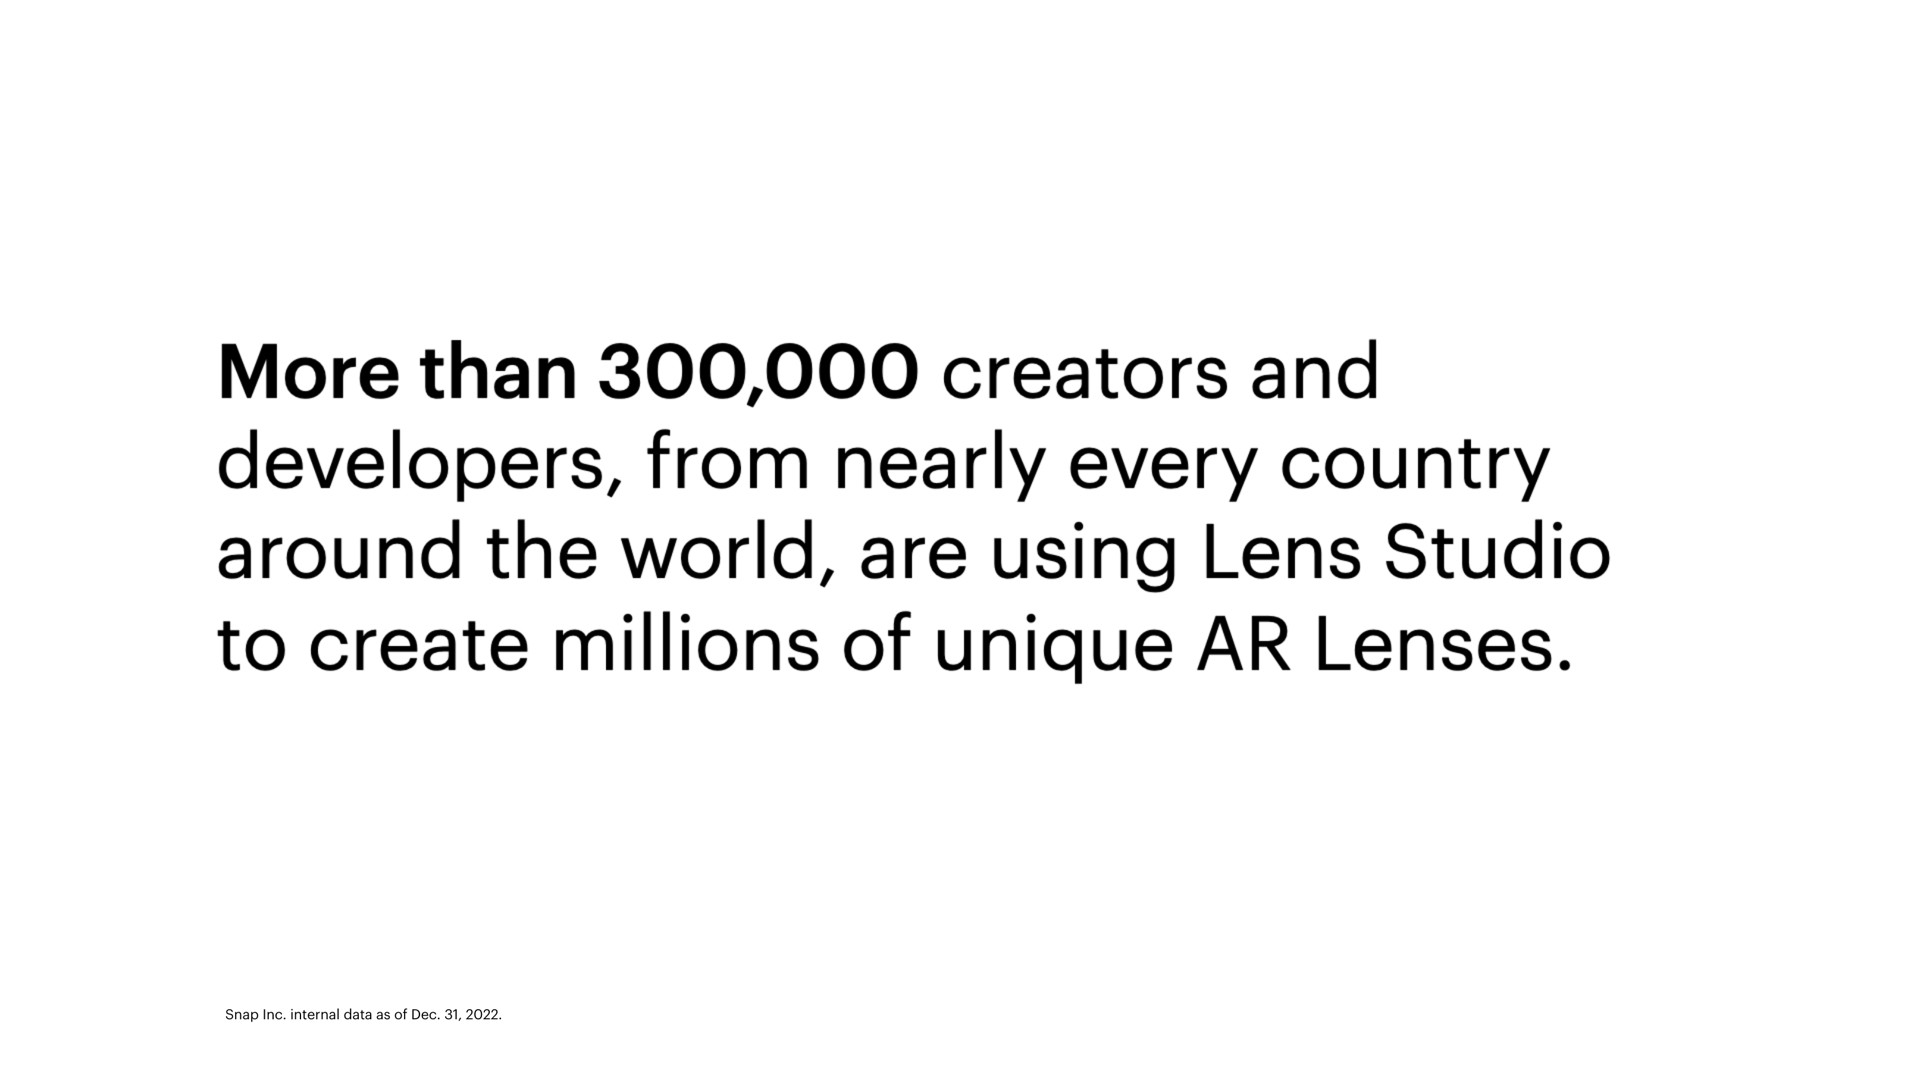 more than creators and developers from nearly every country around the world are using lens studio to create millions of unique lenses | Snap Inc